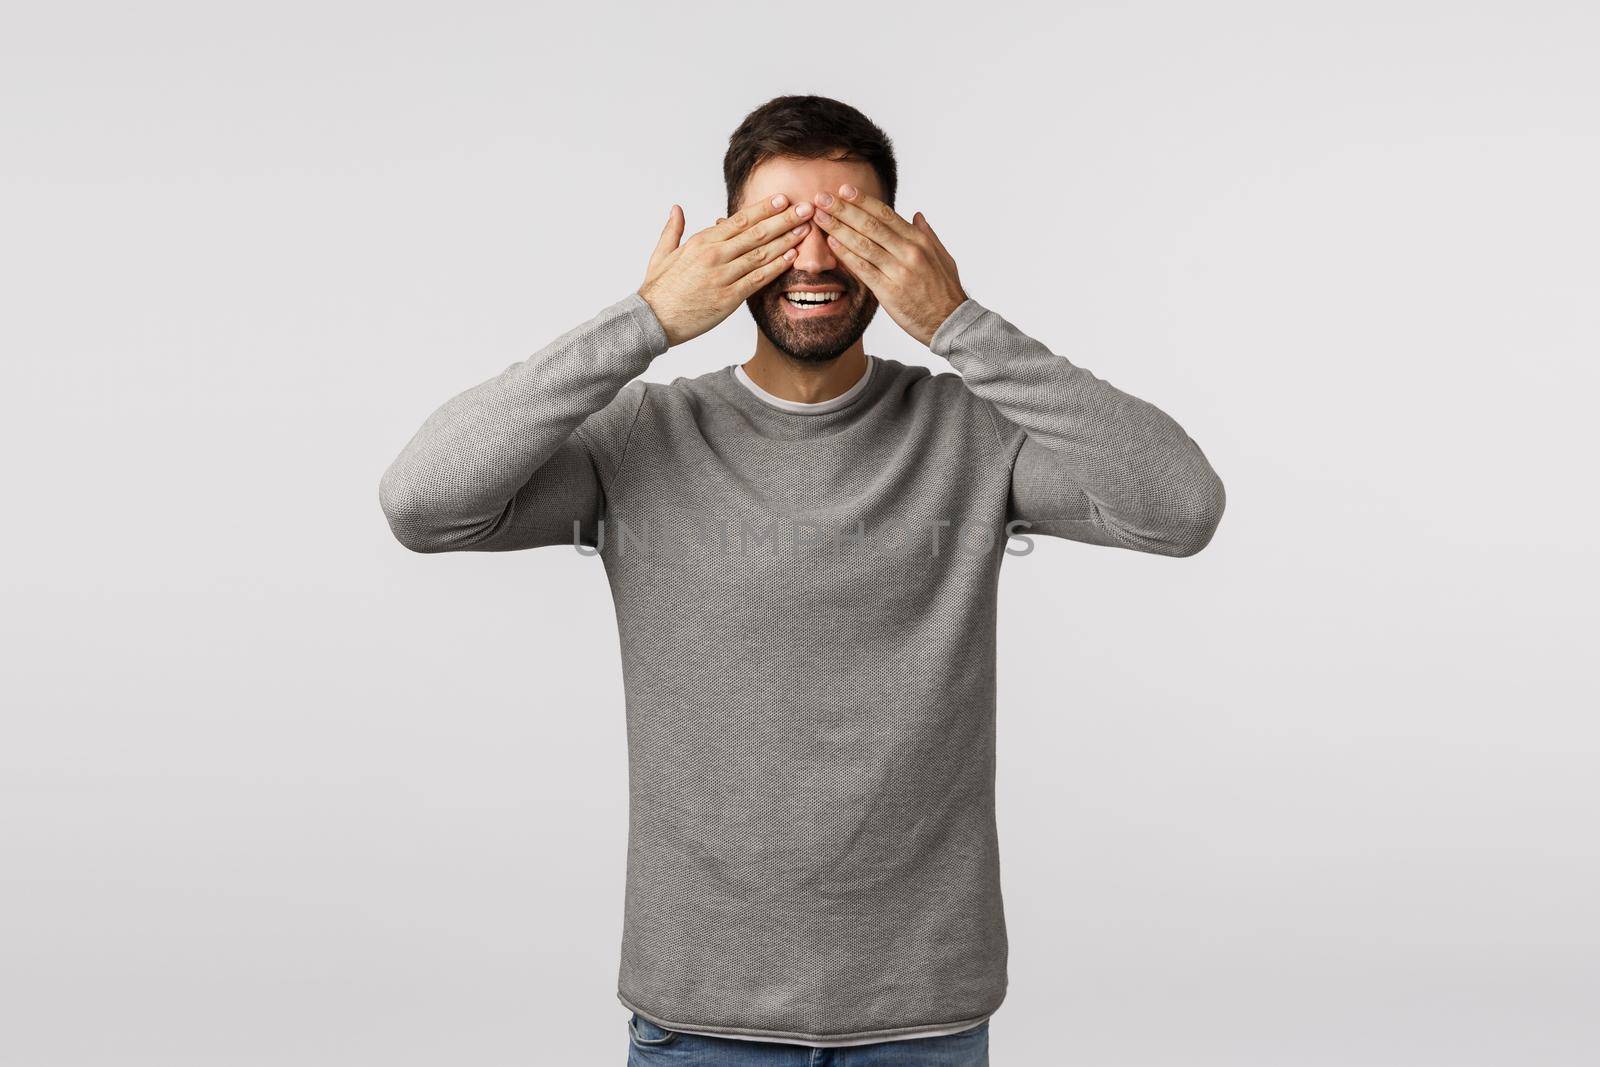 Peekabo, whos there. Cheerful and playful good-looking bearded young father playing baby hide n seek, close eyes standing blindfolded and smiling happy, standing white background waiting surprise.